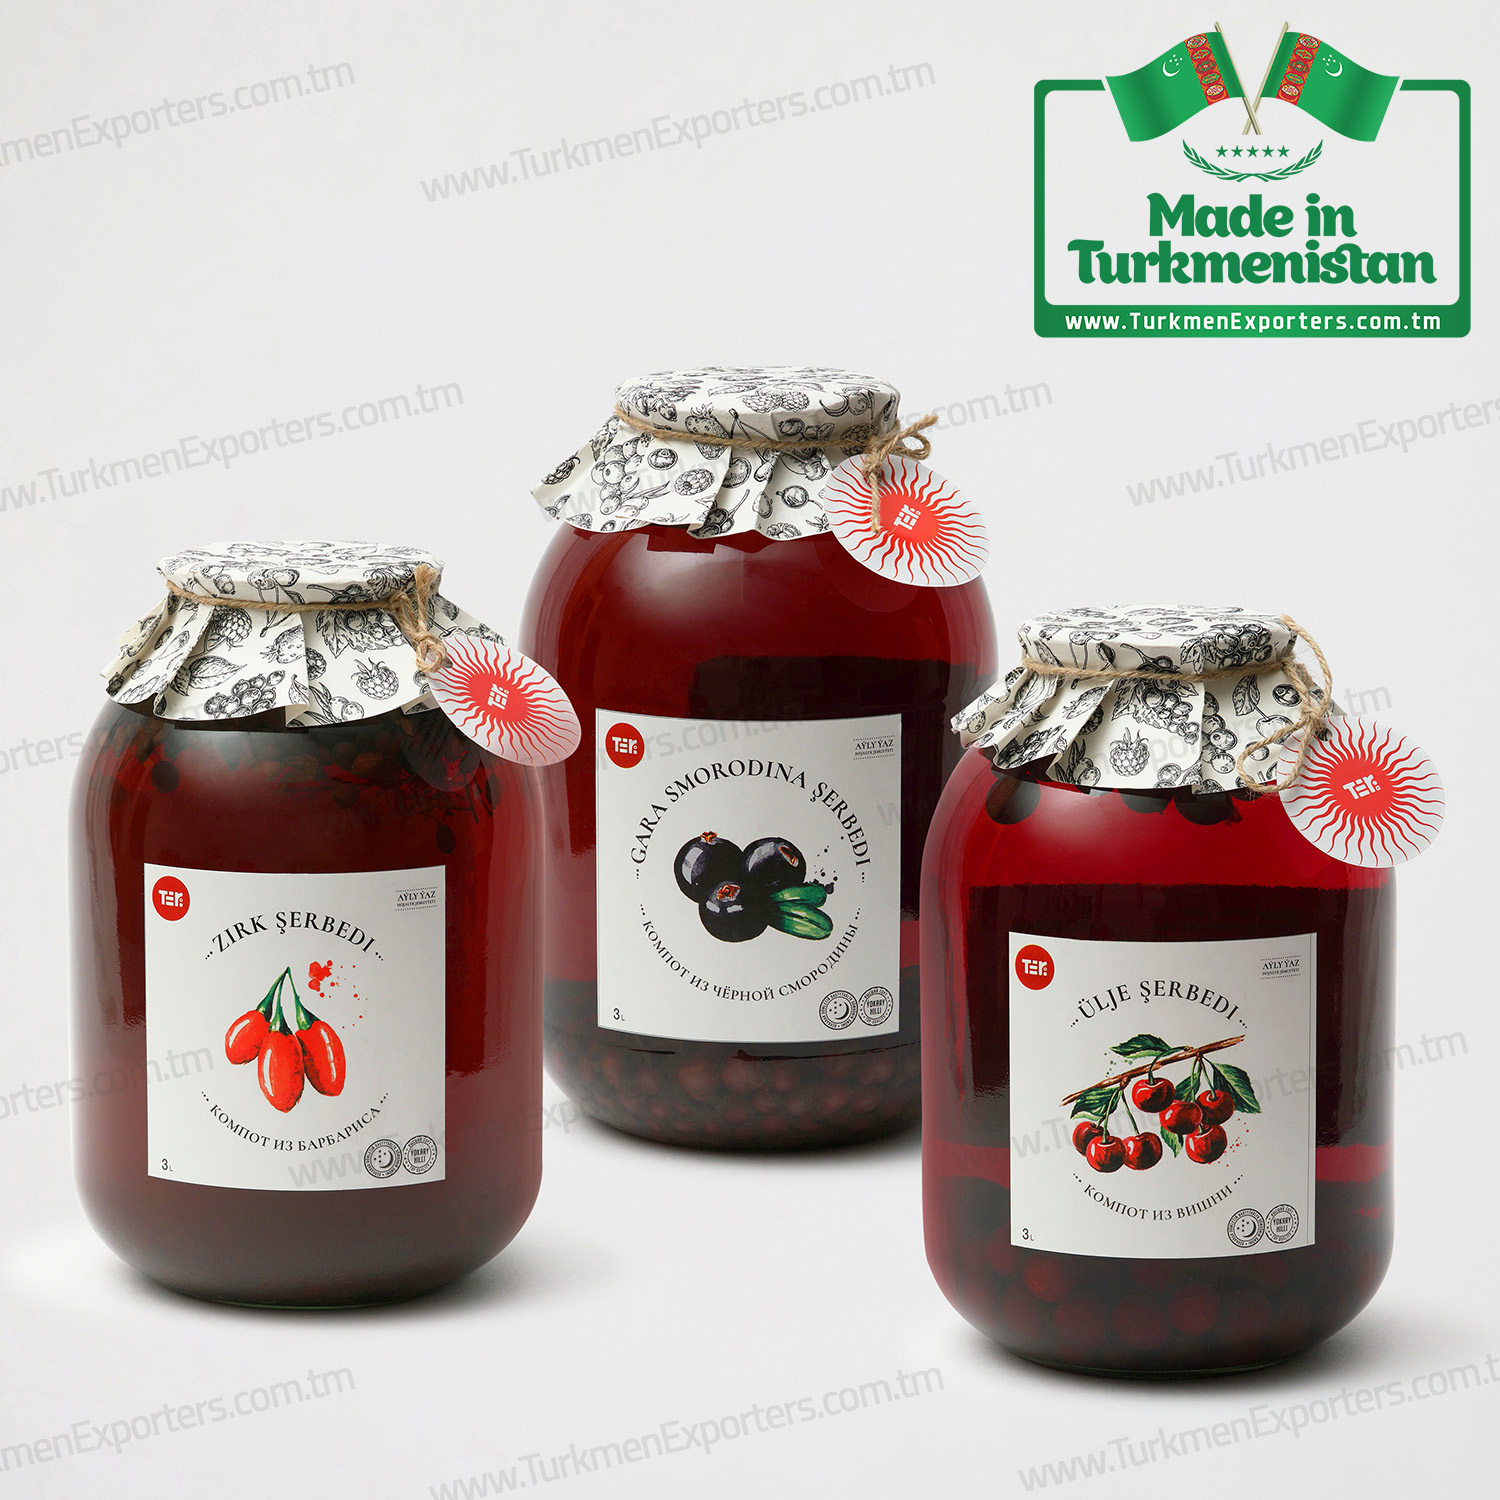 Fruit compotes Teri wholesale from Turkmenistan | Ayly Yaz economic society 